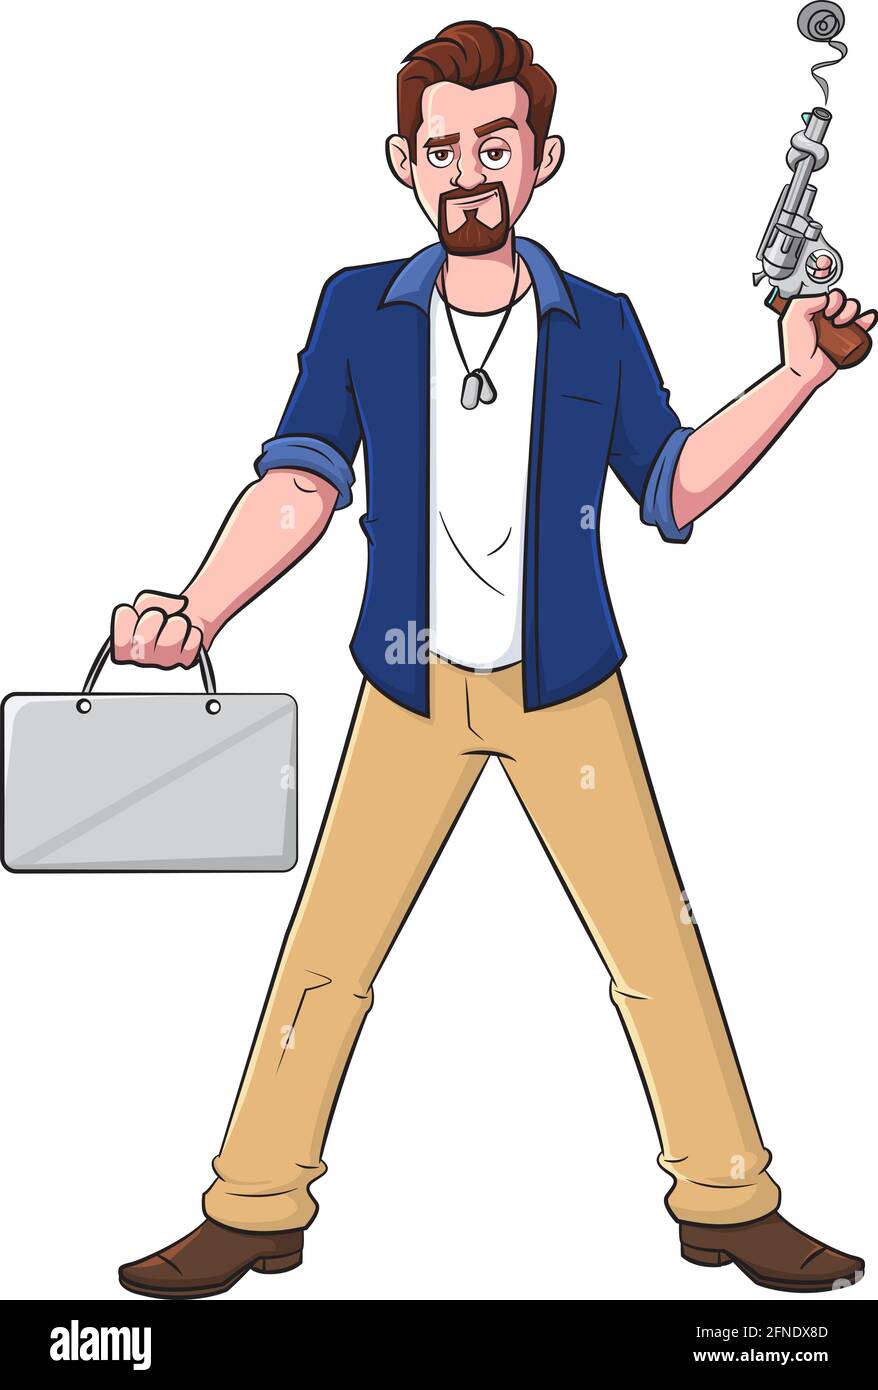 Cartoon vector illustration of a gangster posing and holding a briefcase and gun Stock Vector